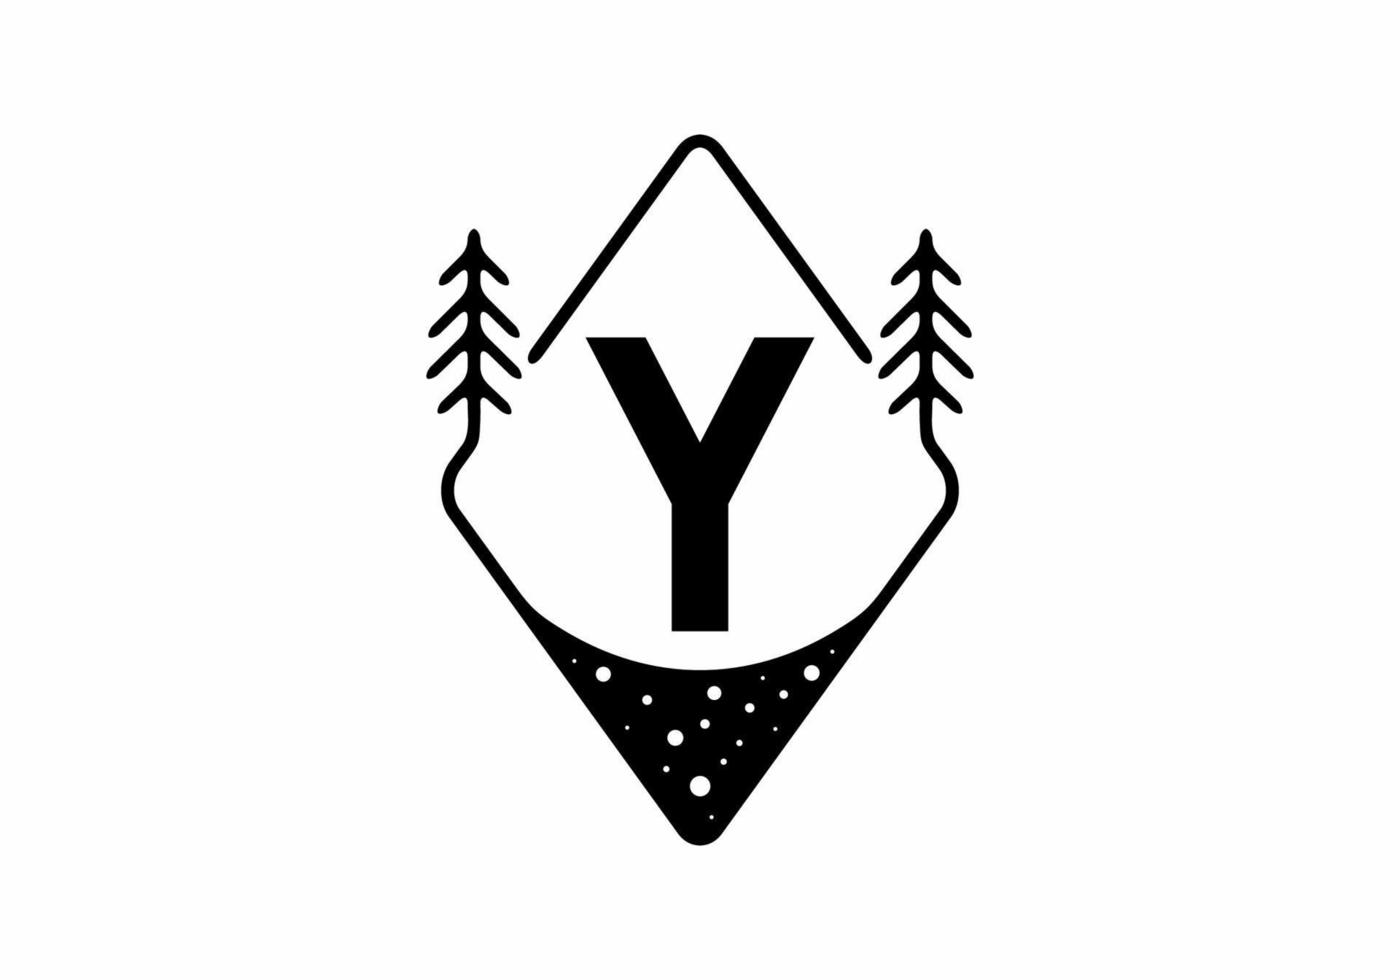 Black line art badge with pine trees and Y letter vector